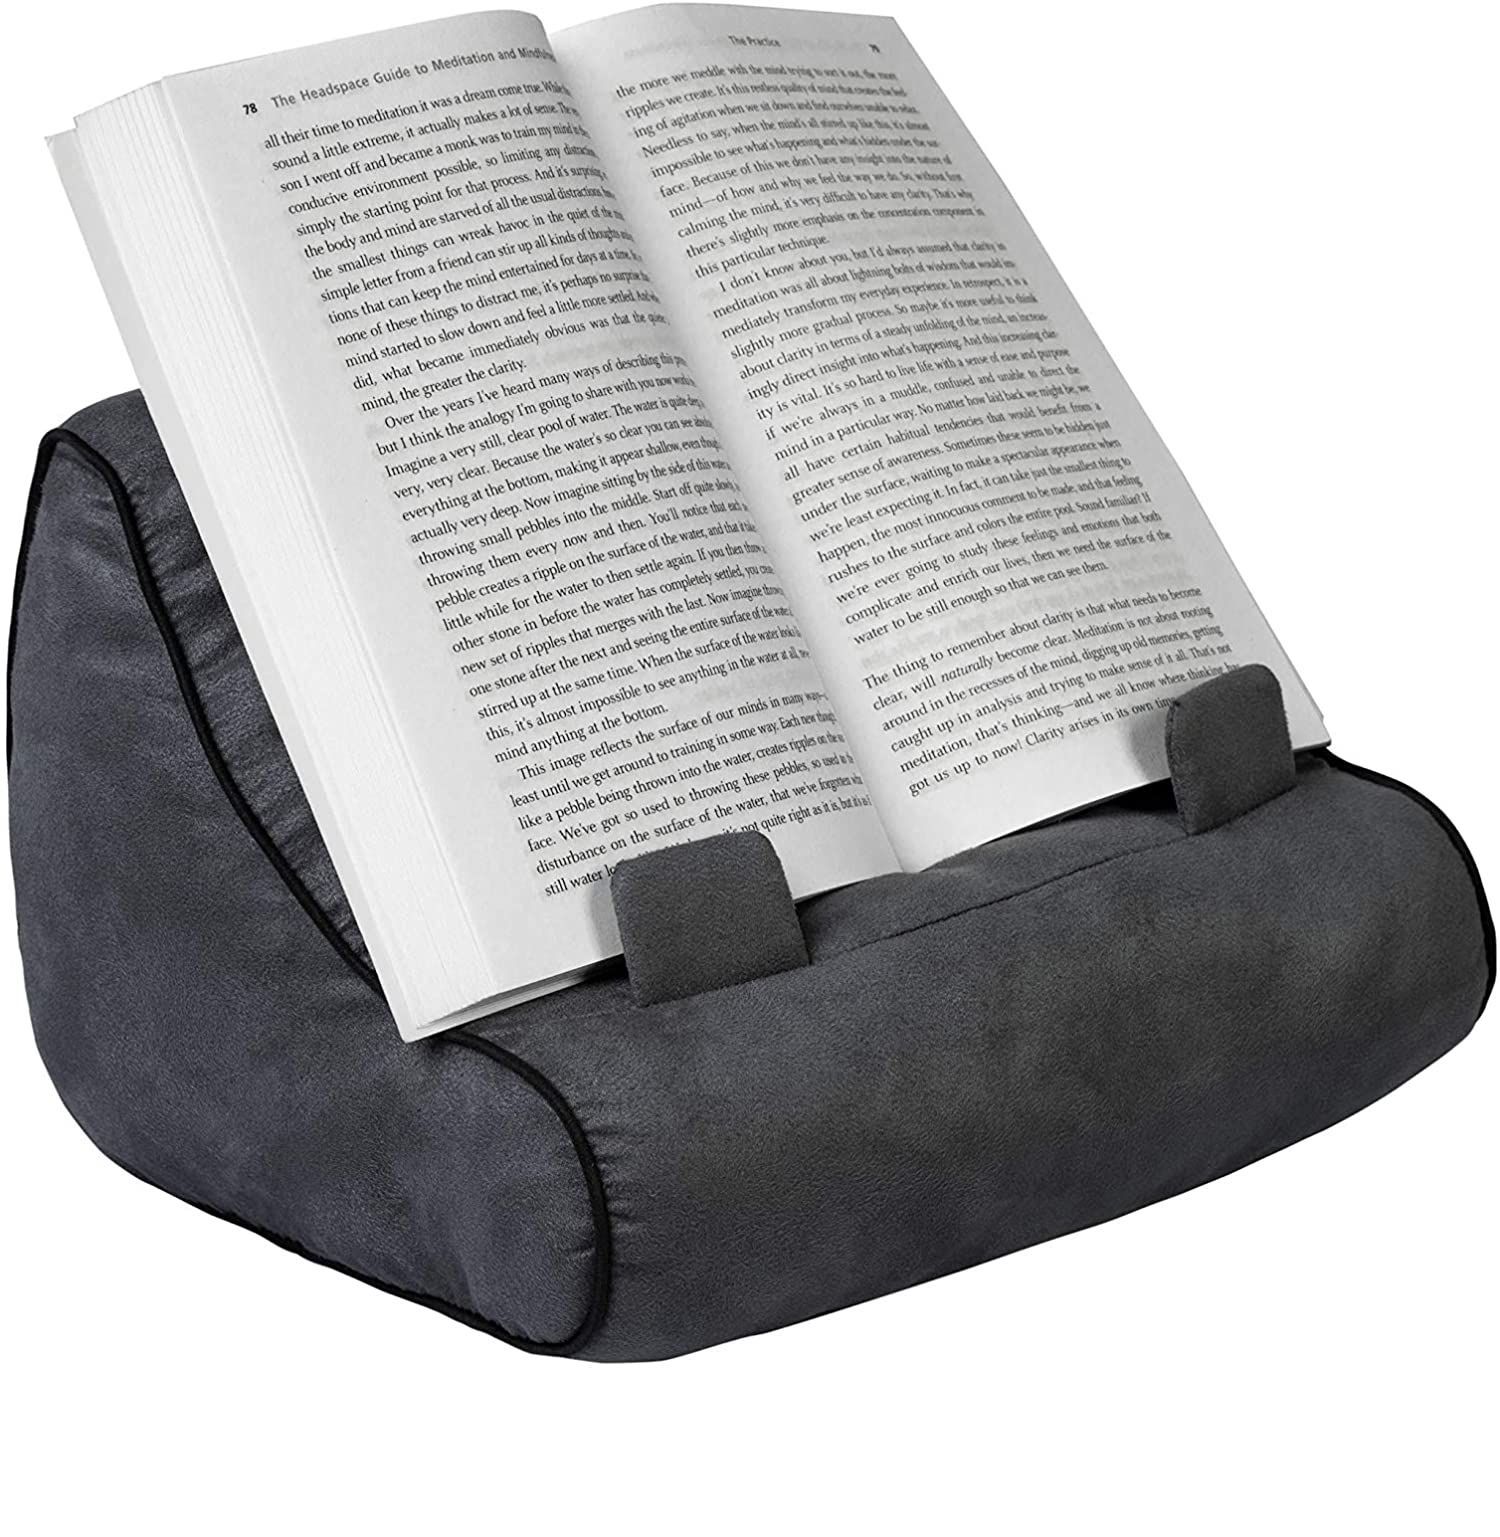 Discover more than 85 gifts for reading in bed latest